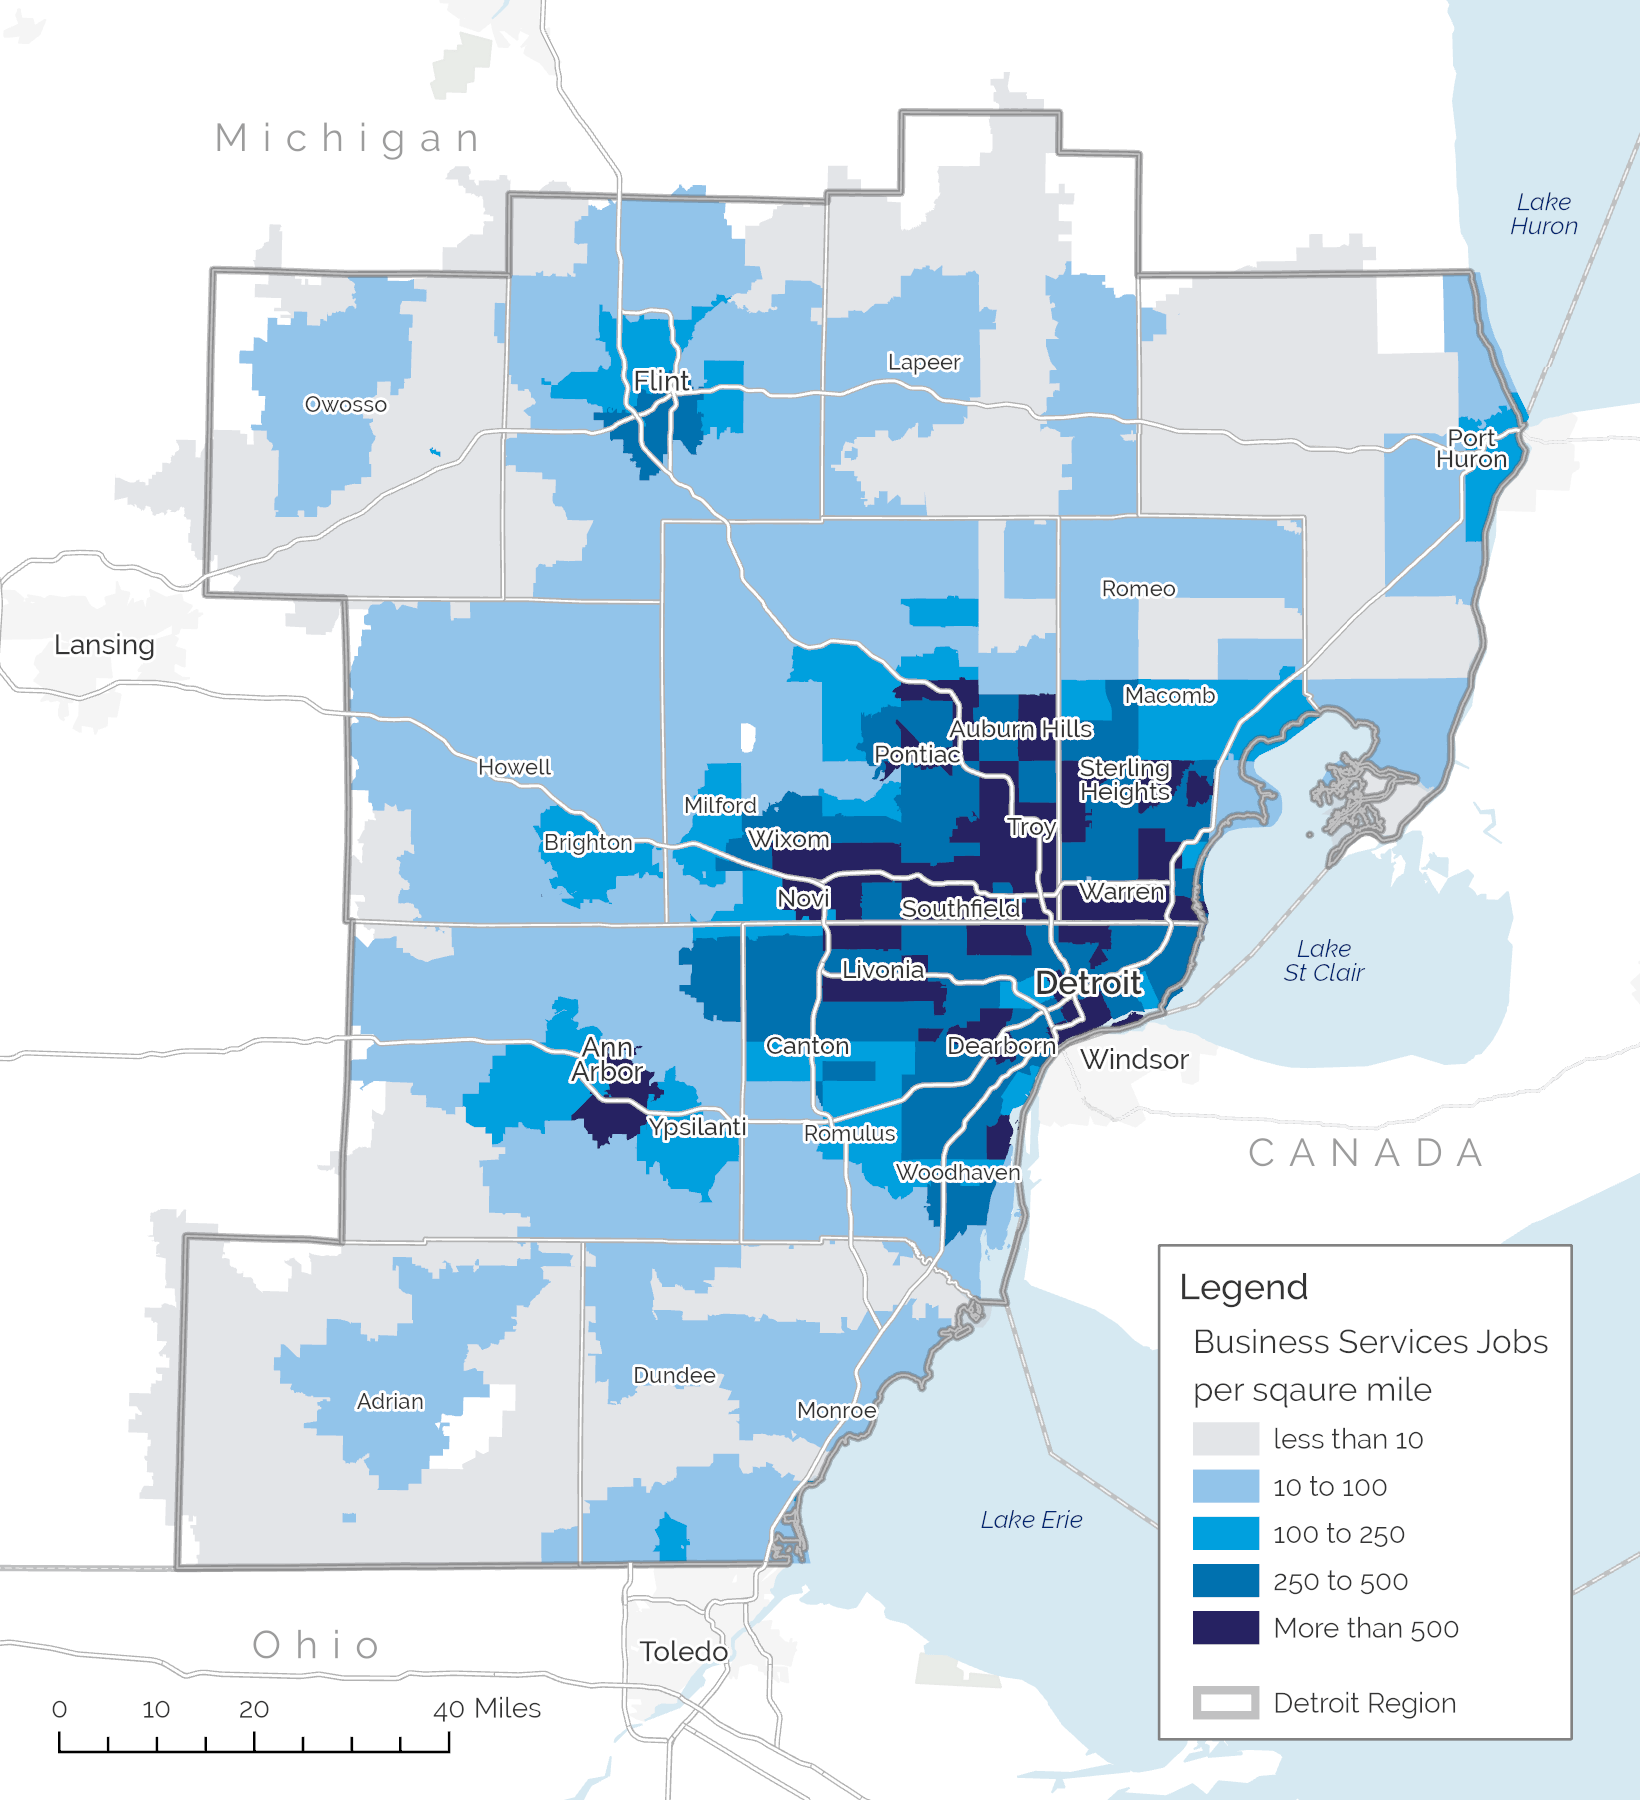 Map representing the density of business services related jobs in the Detroit Region